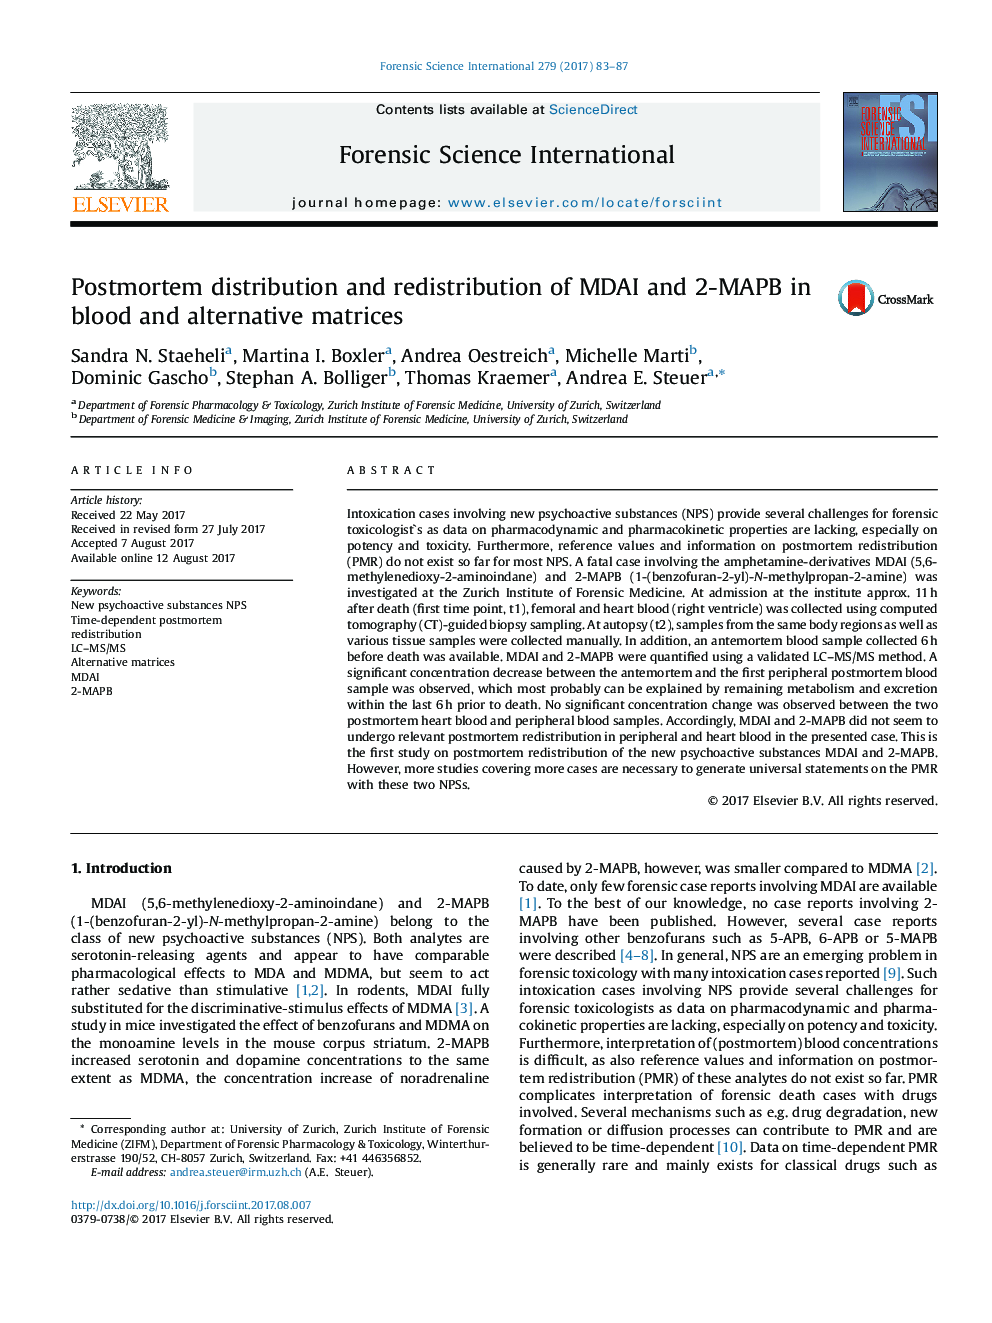 Postmortem distribution and redistribution of MDAI and 2-MAPB in blood and alternative matrices